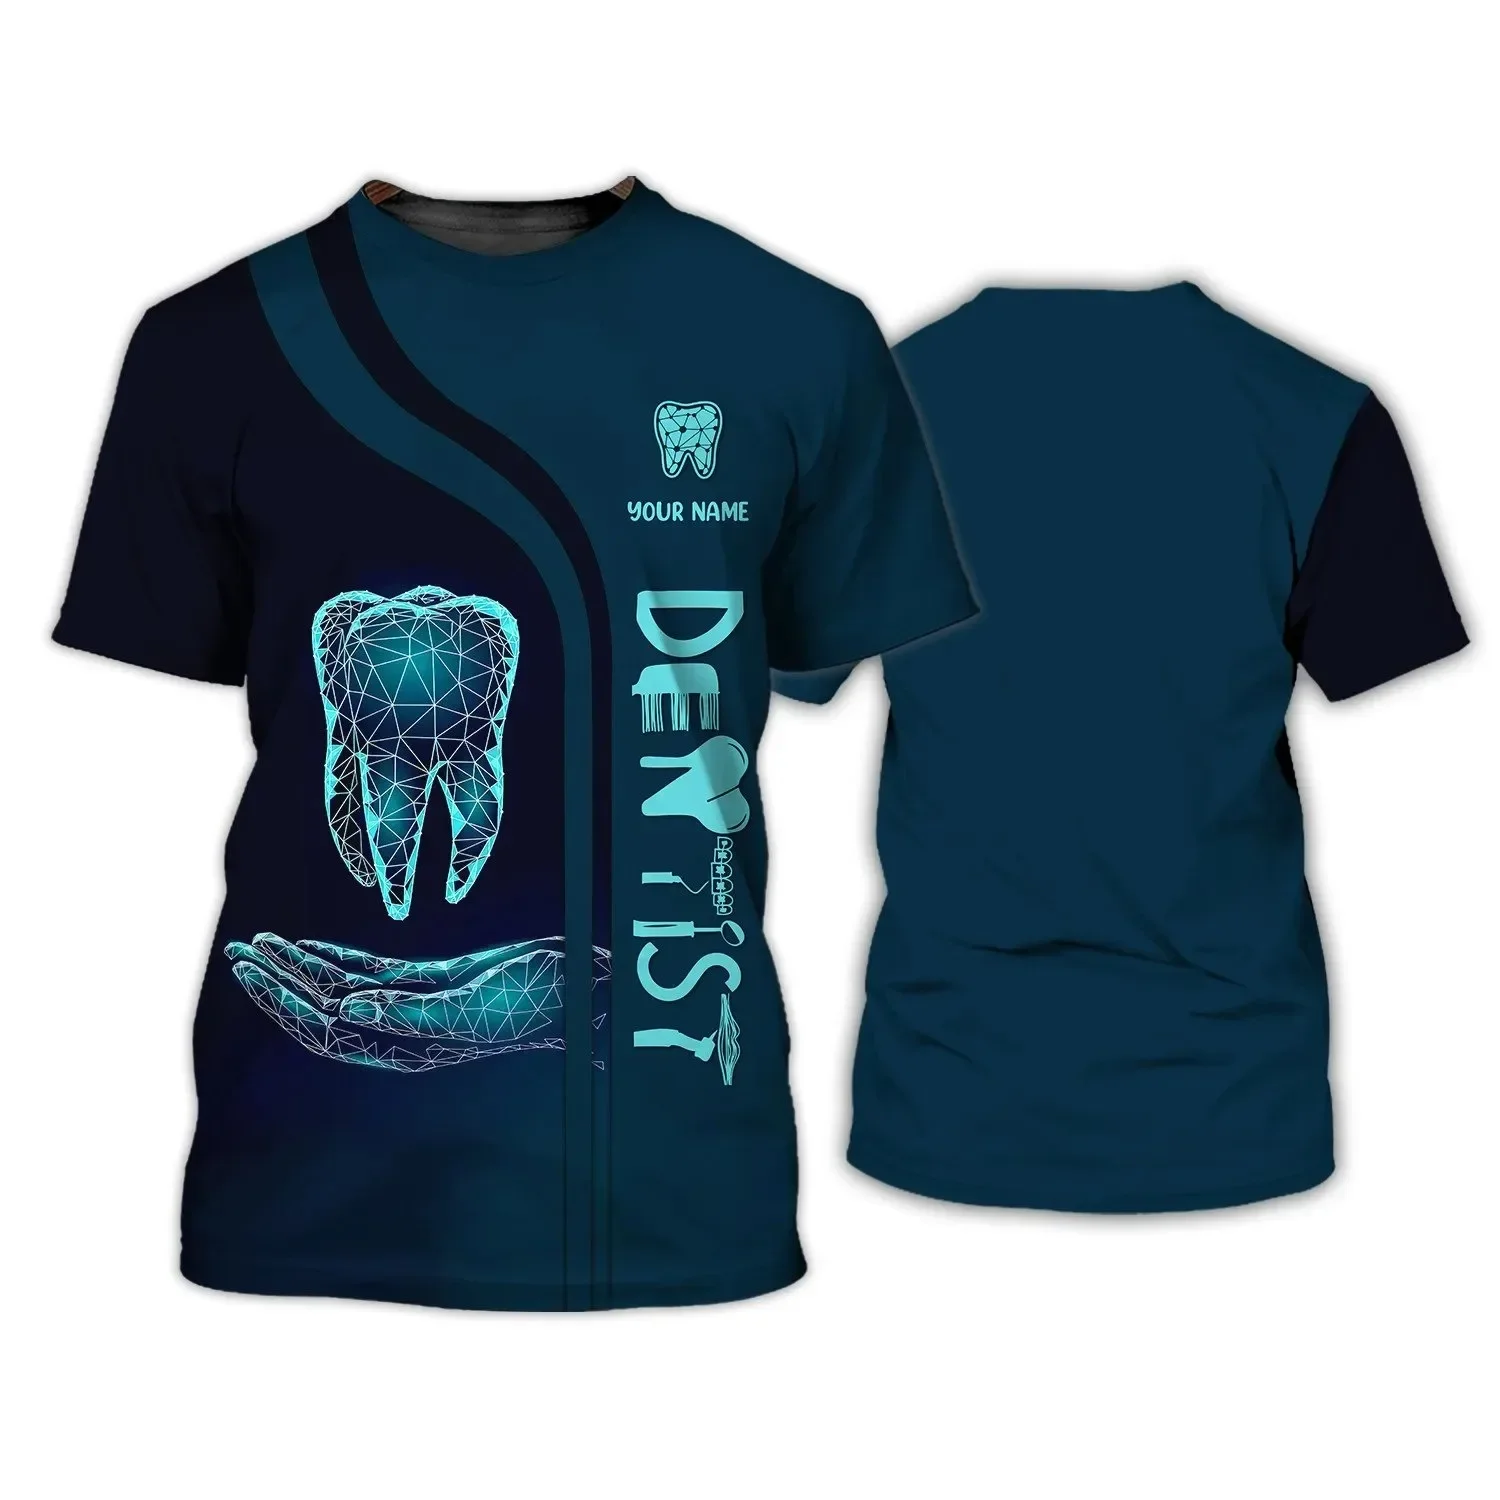 Dentist uniforms Men's T-shirts Medical nurse Clothing Women's clinical Surgical tees lady hospital Surgical dentistry teeth New